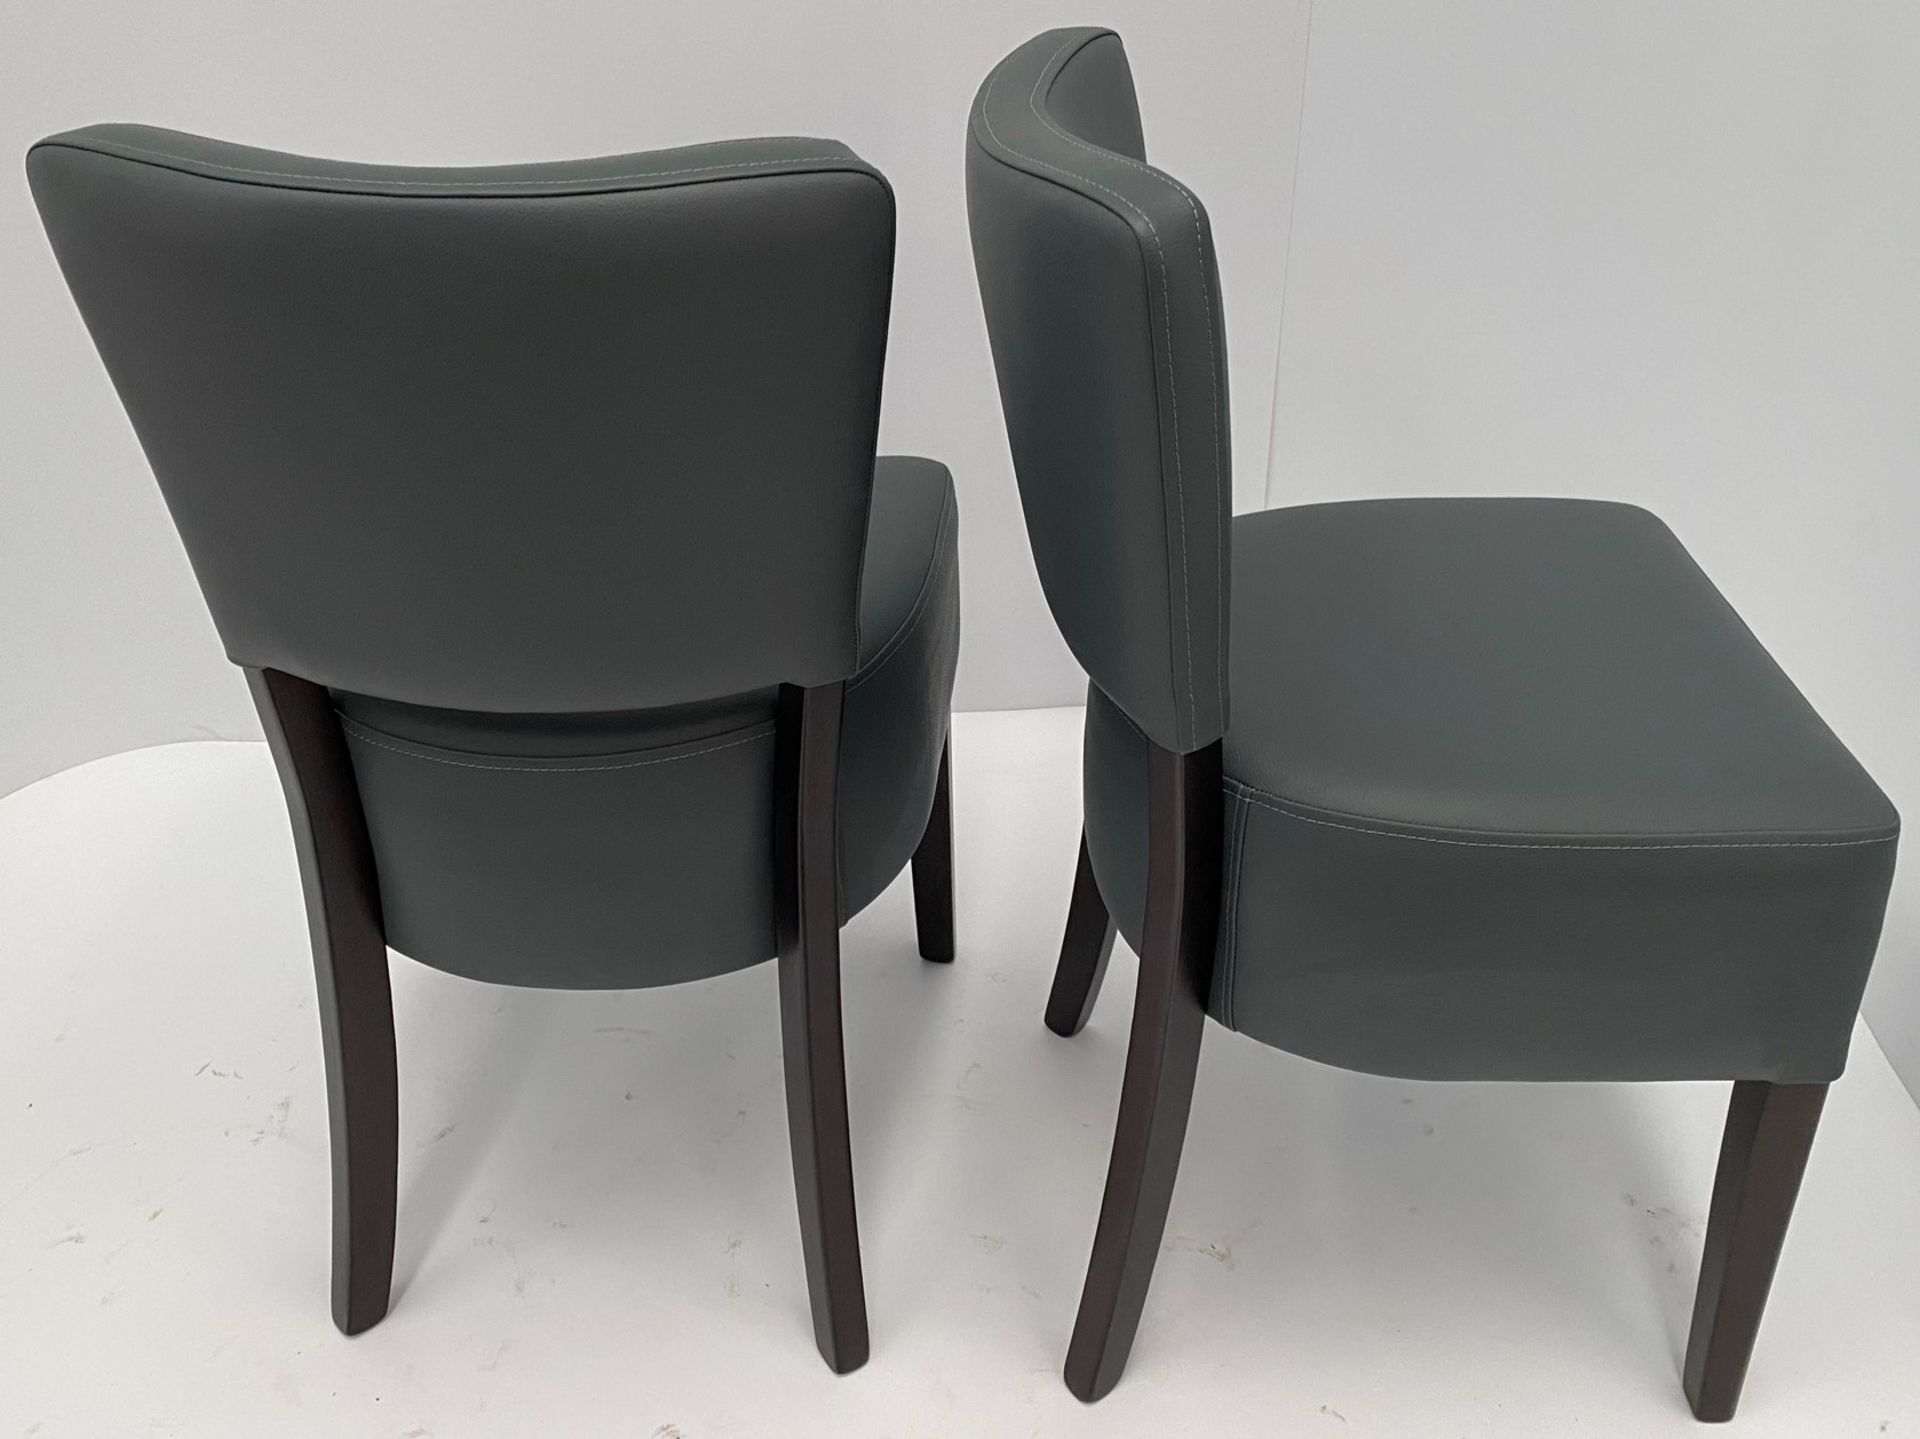 2 x Oregon Vena SA-4 Grey side/dining chairs with Wenge coloured frames - Image 2 of 3